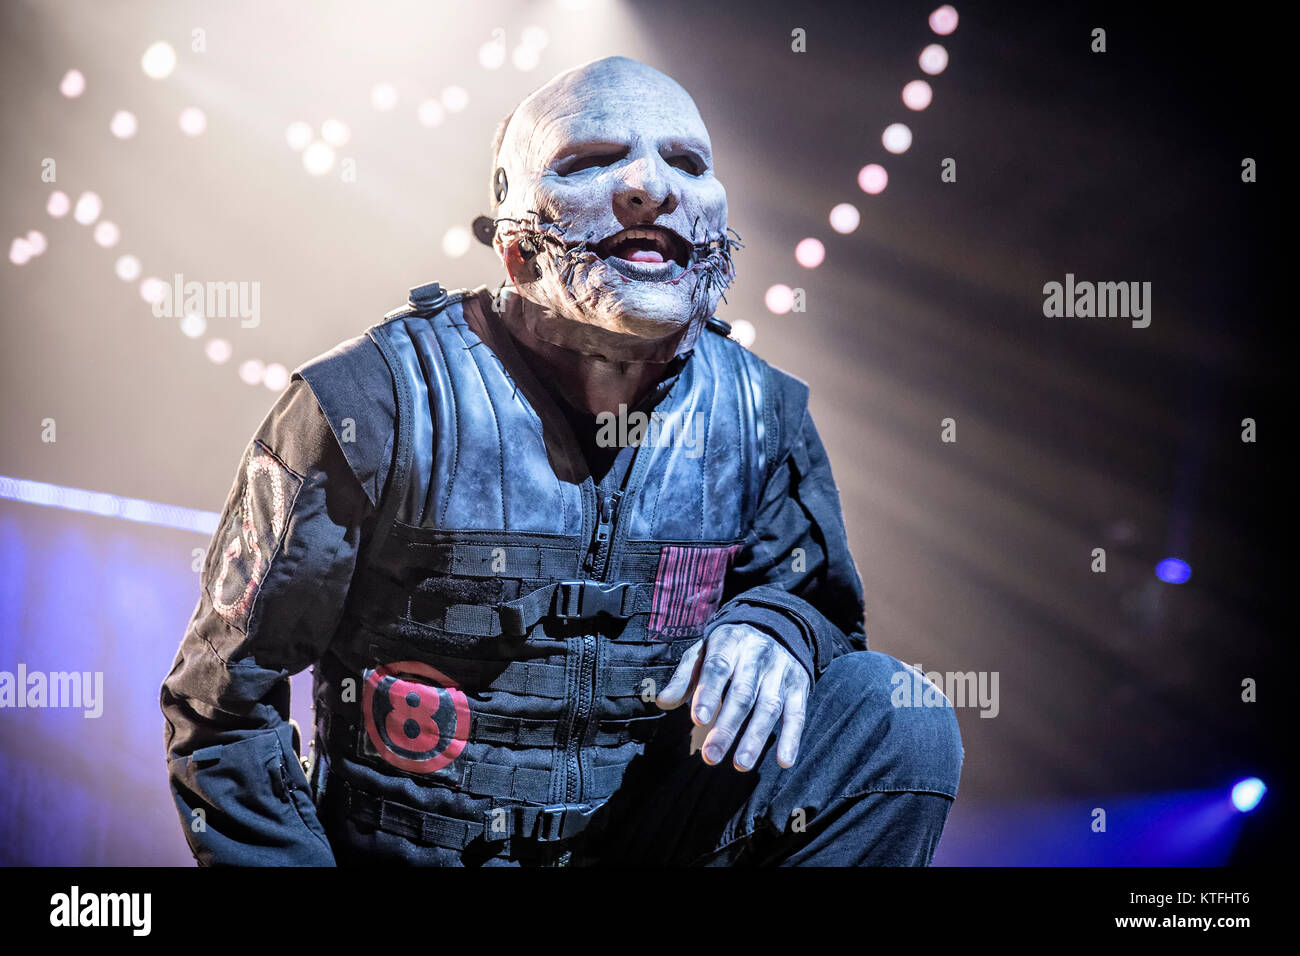 The American heavy metal band Slipknot performs a live concert at Oslo Spektrum. Here the band’s vocalist Corey Taylor is seen live on stage. Norway, 10/02 2015. Stock Photo